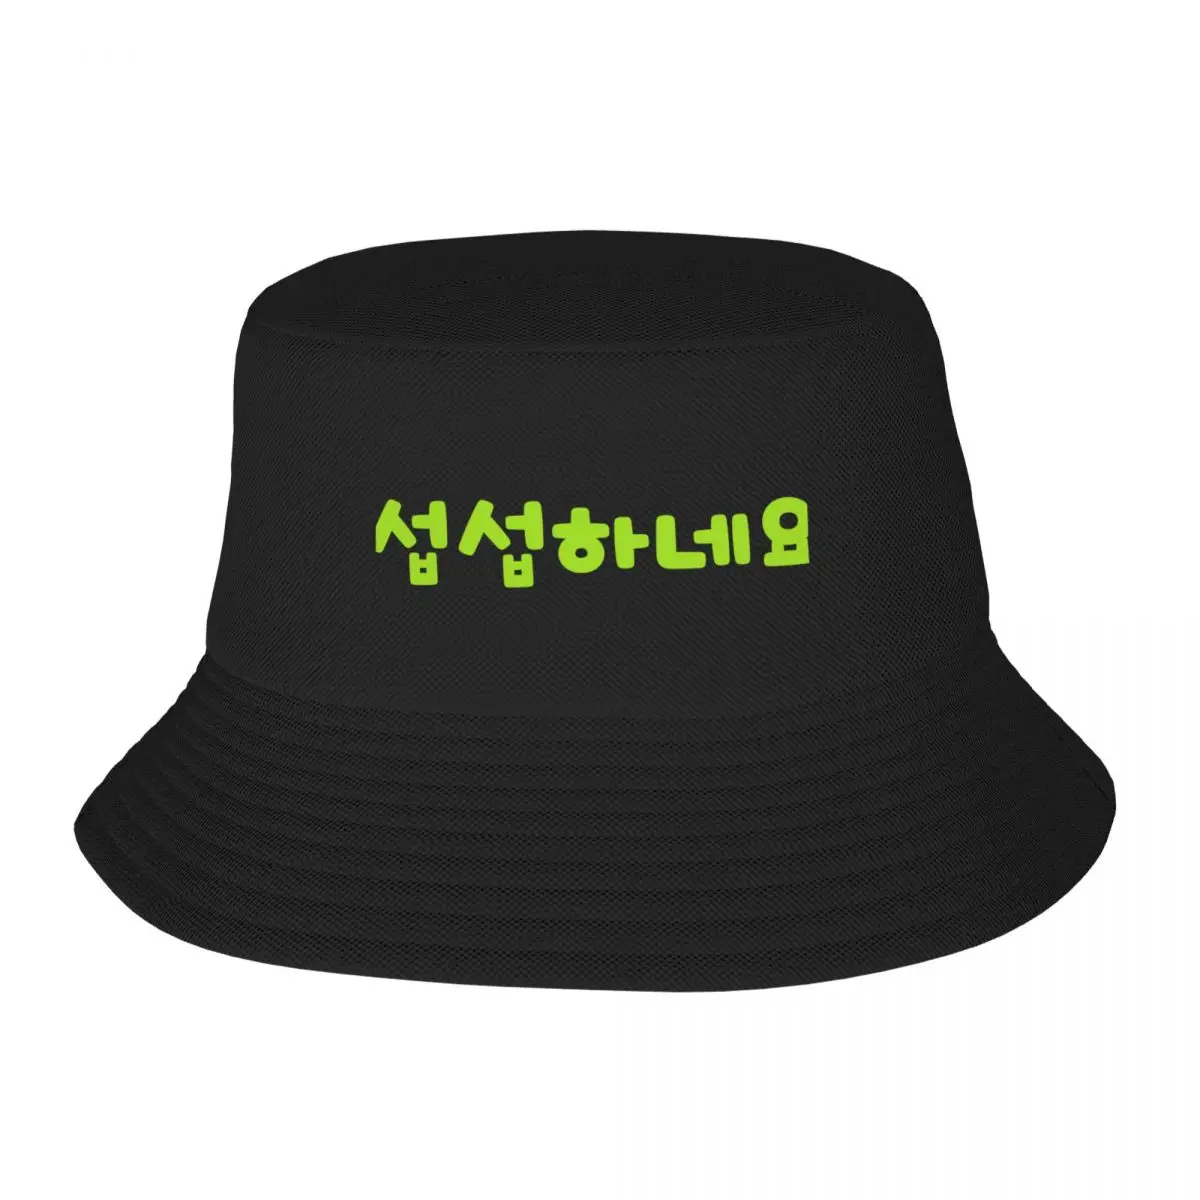 

New I'm disappointed - Korean Phrases -  Bucket Hat Icon Military Tactical Caps foam party hats Cap Women's Men's